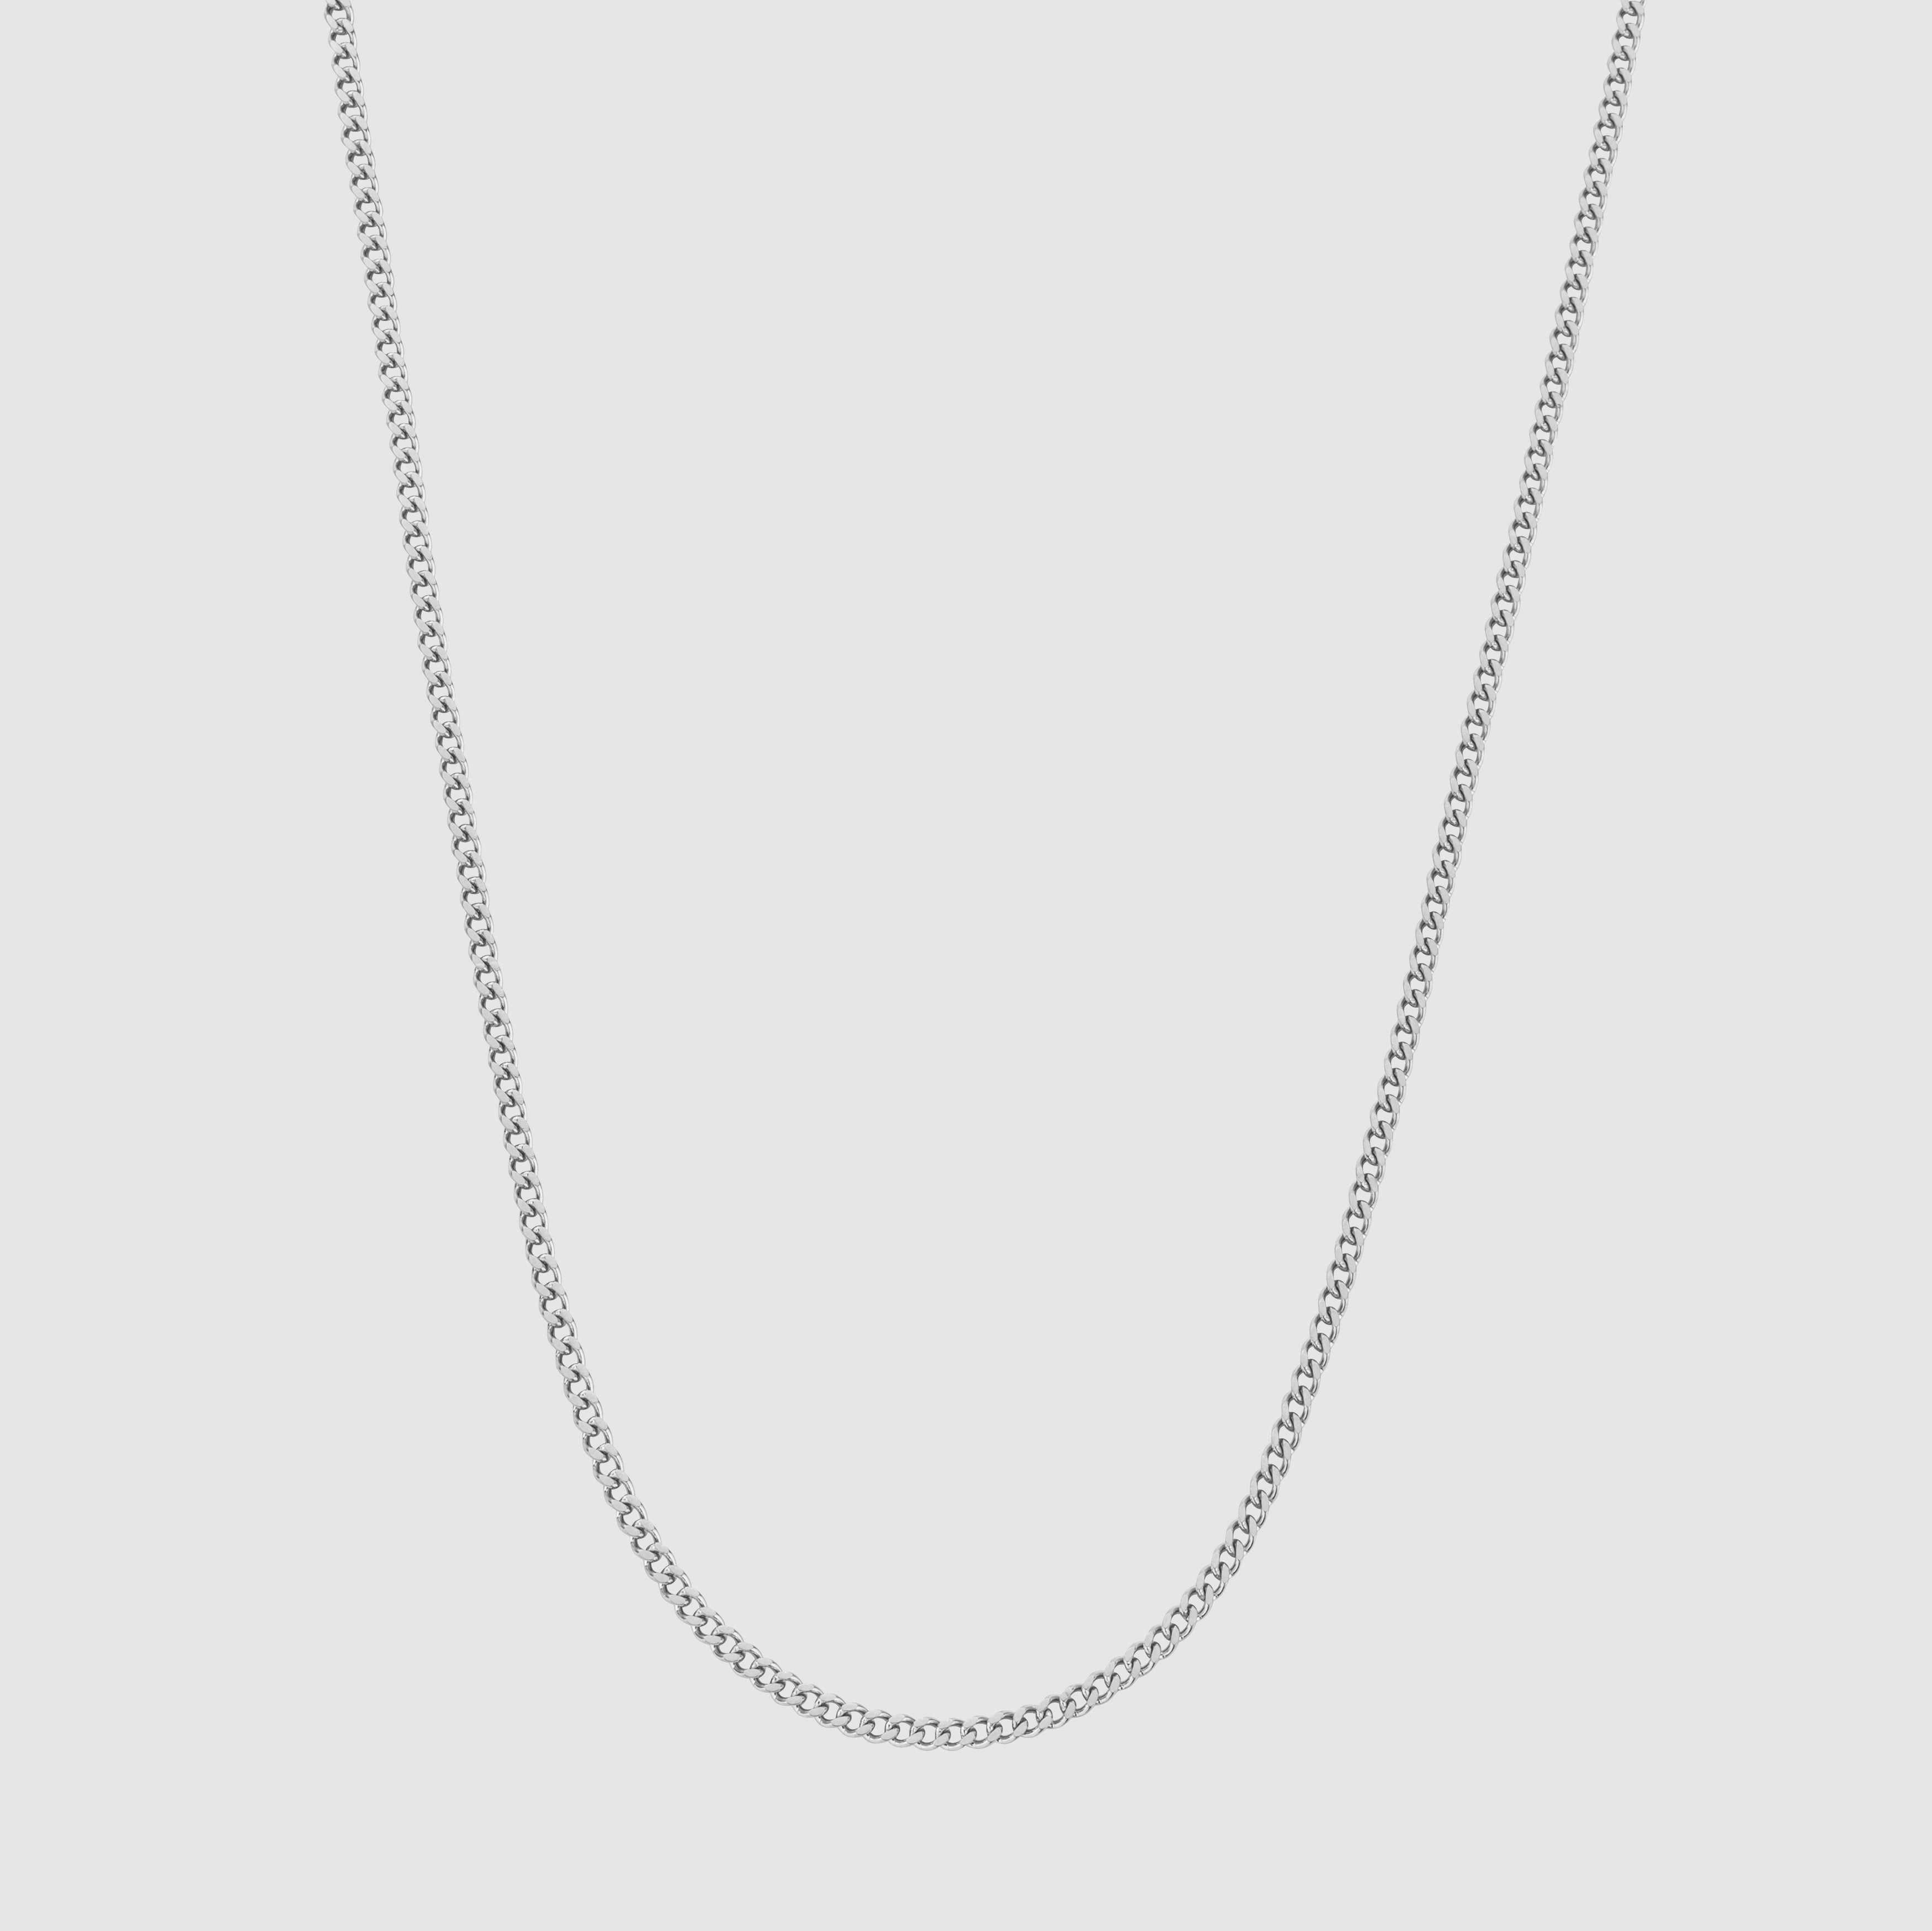 Connell ketting (zilver) 2 mm